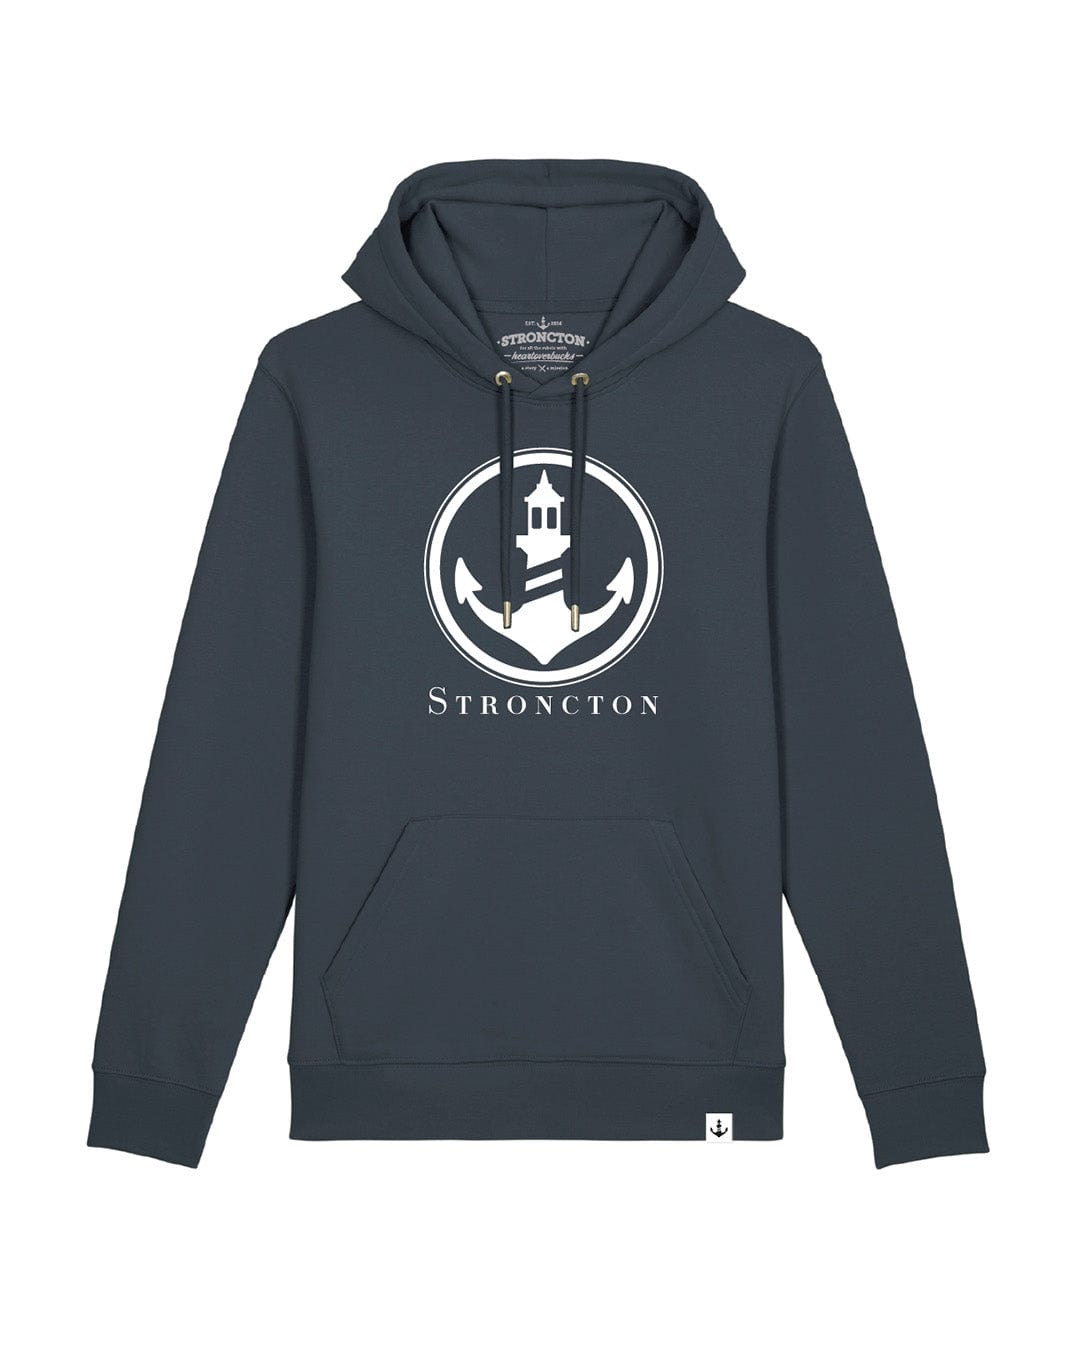 Anchouse Hoodie - India Ink Grey